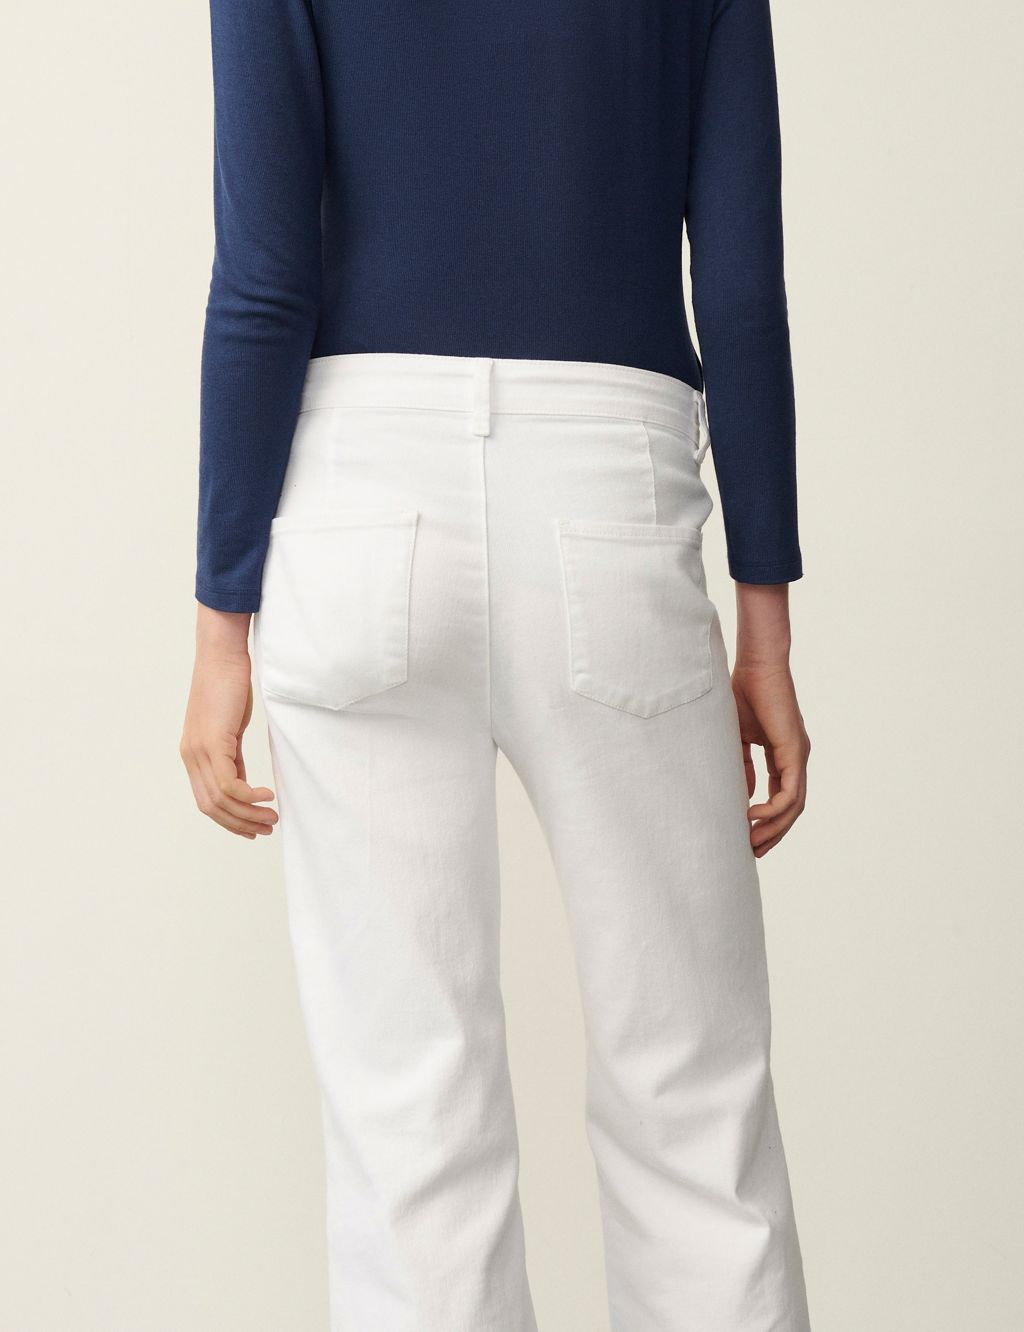 High Waisted Flared Jeans image 4